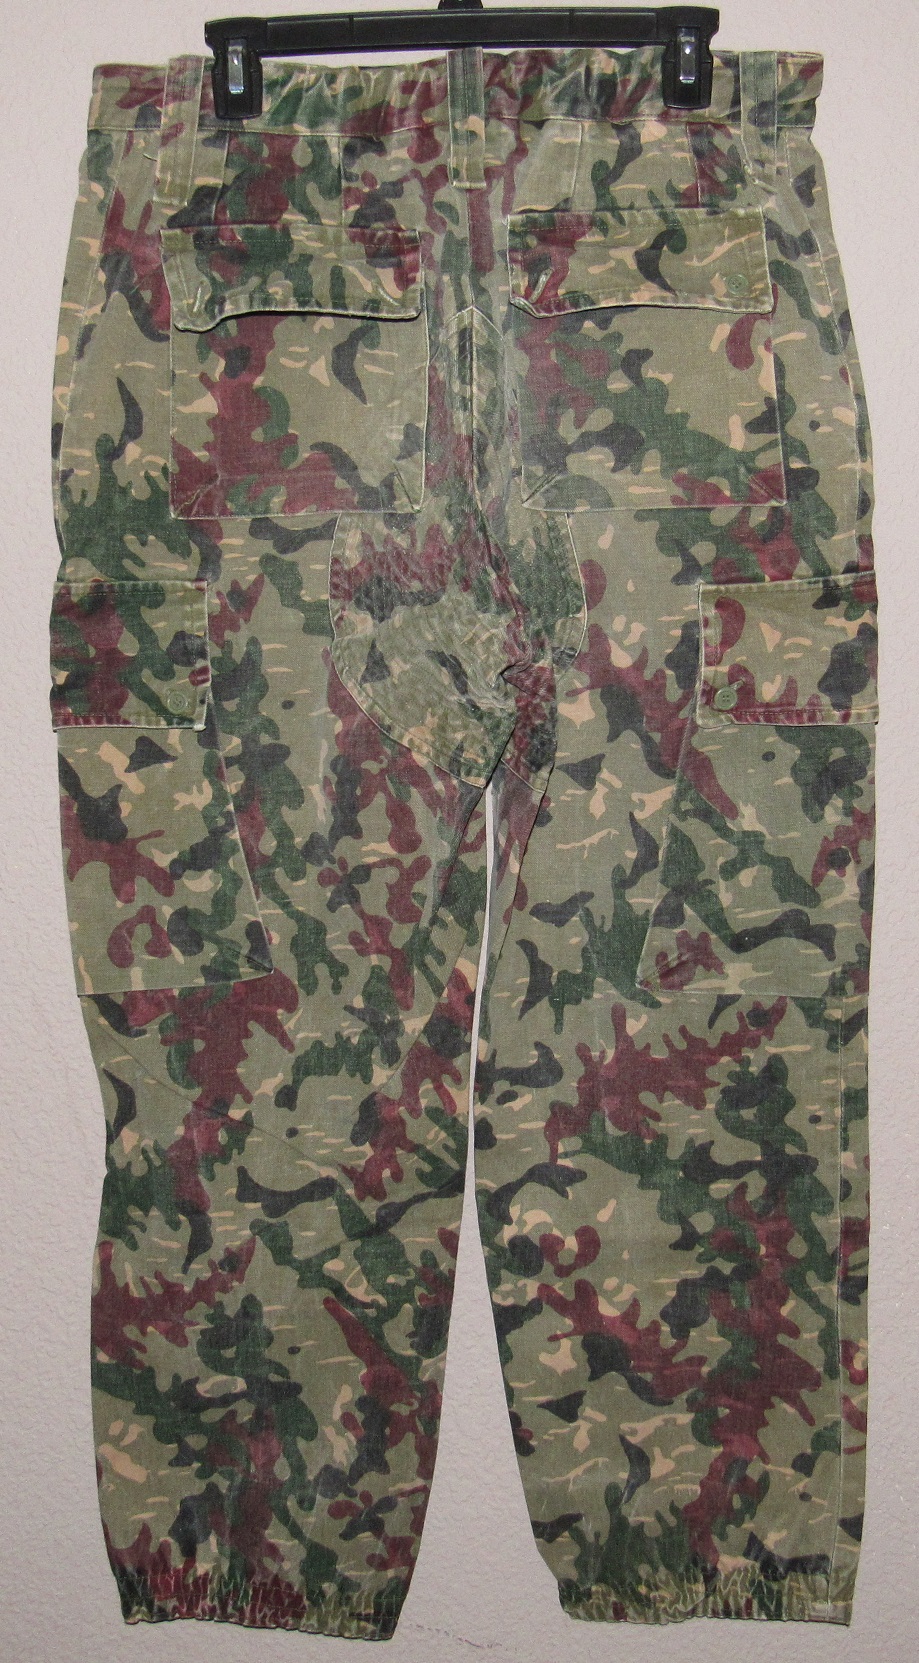 Early Spanish Camouflage uniforms. Spanis13